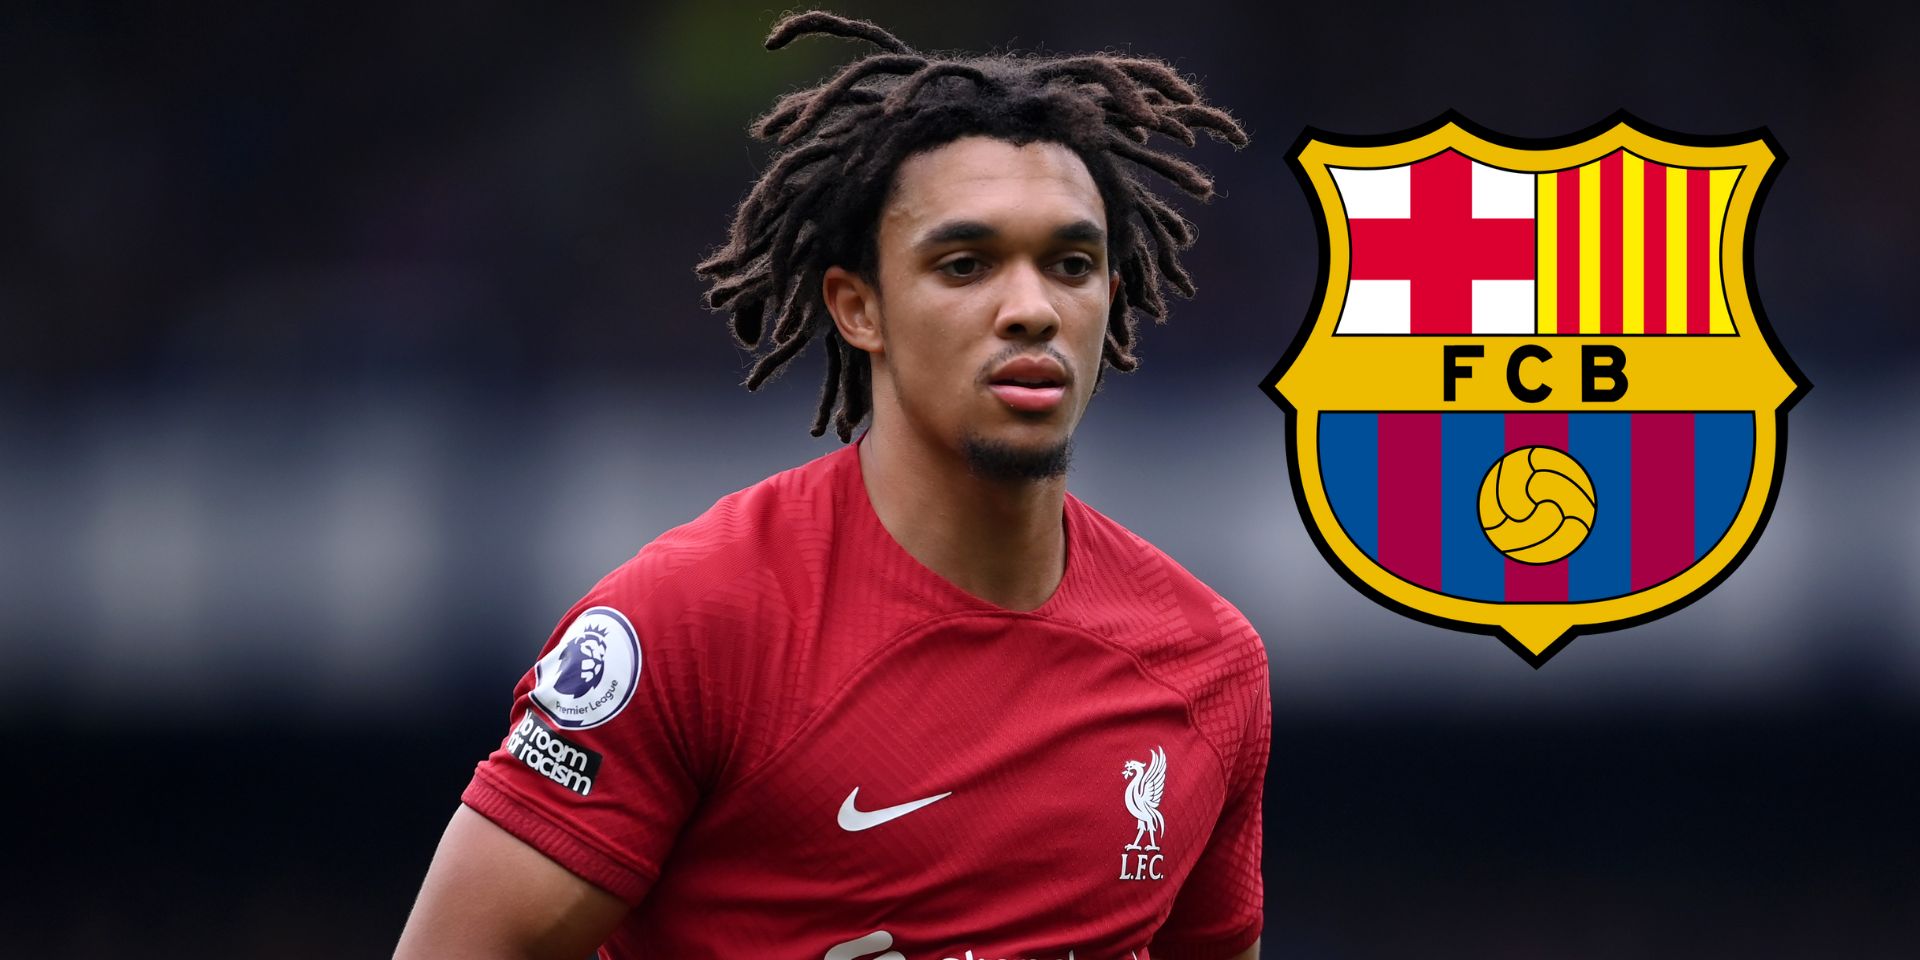 23-year-old named as a ‘possible’ transfer target for Barcelona as they look to spend their ‘high budget’ on Liverpool star – report